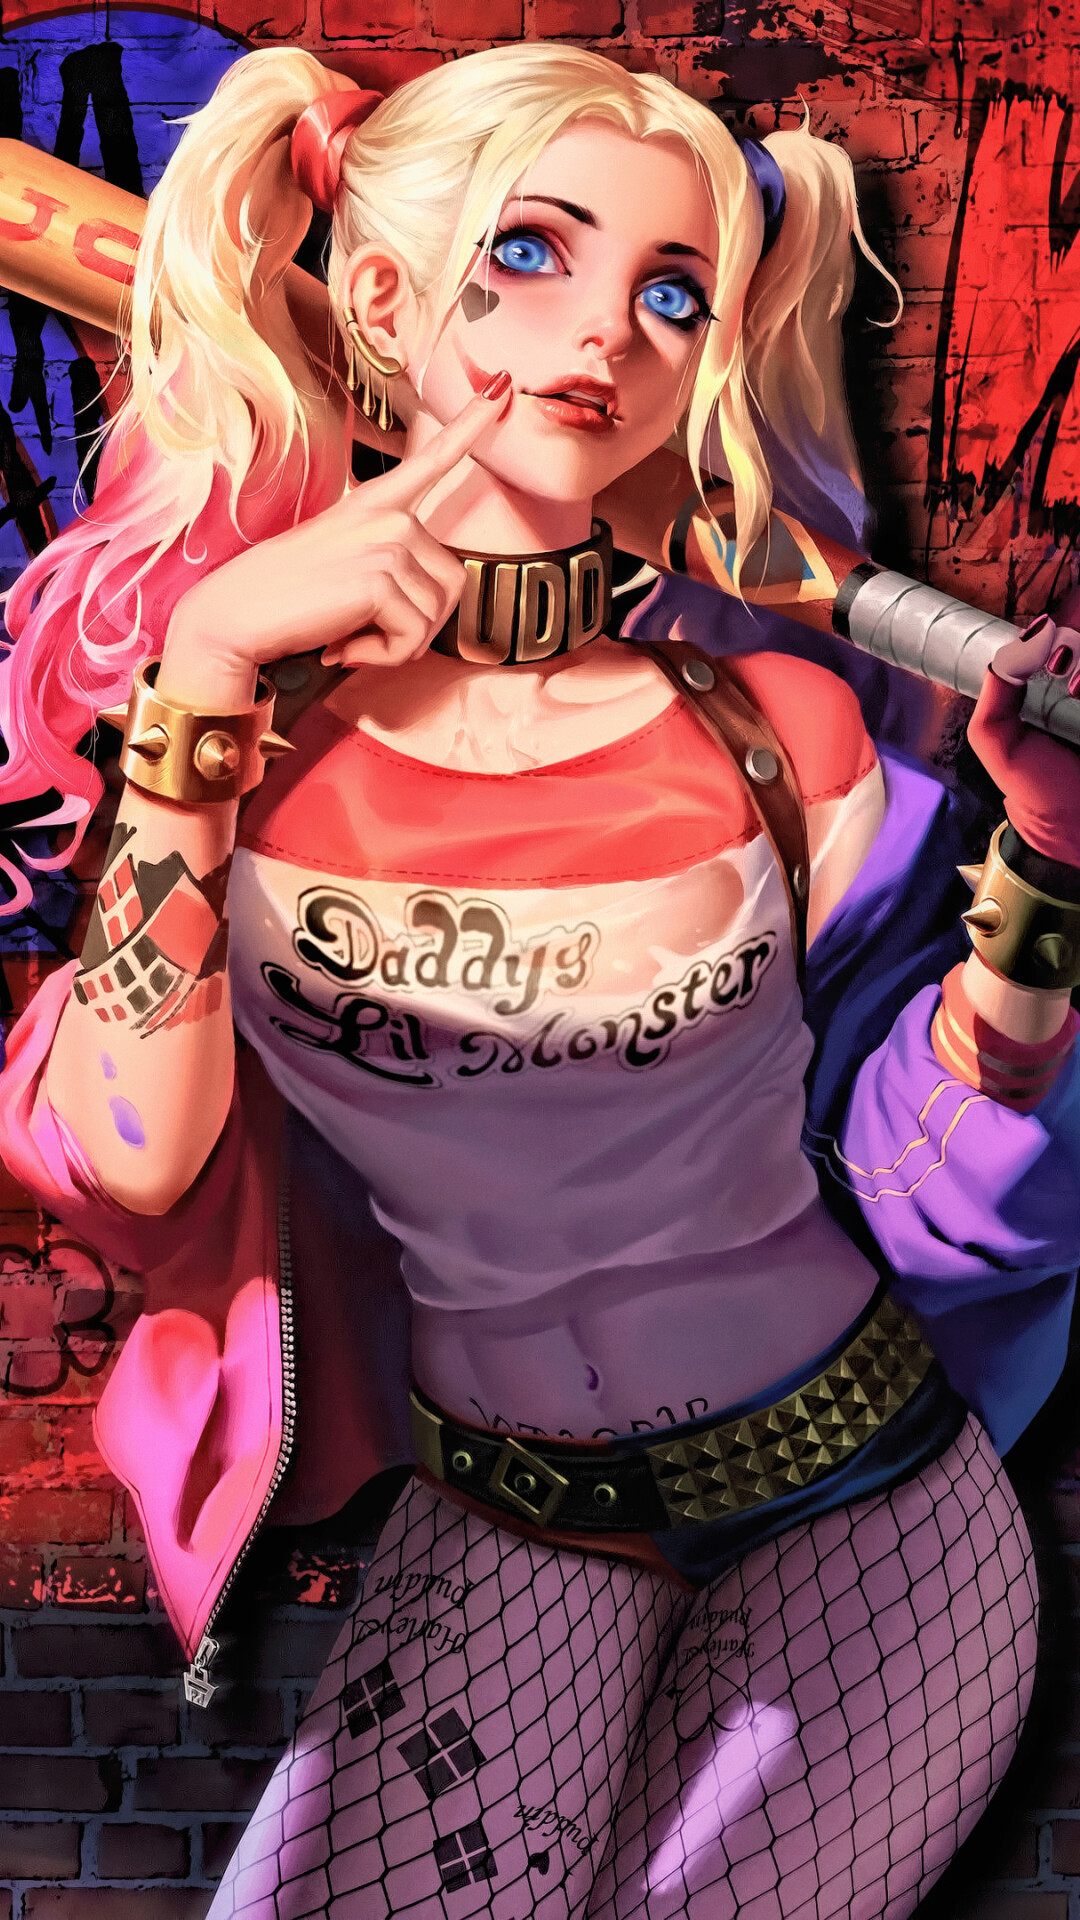 DC Villain: Harley Quinn, First appeared in Suicide Squad as a member of Task Force X. 1080x1920 Full HD Background.